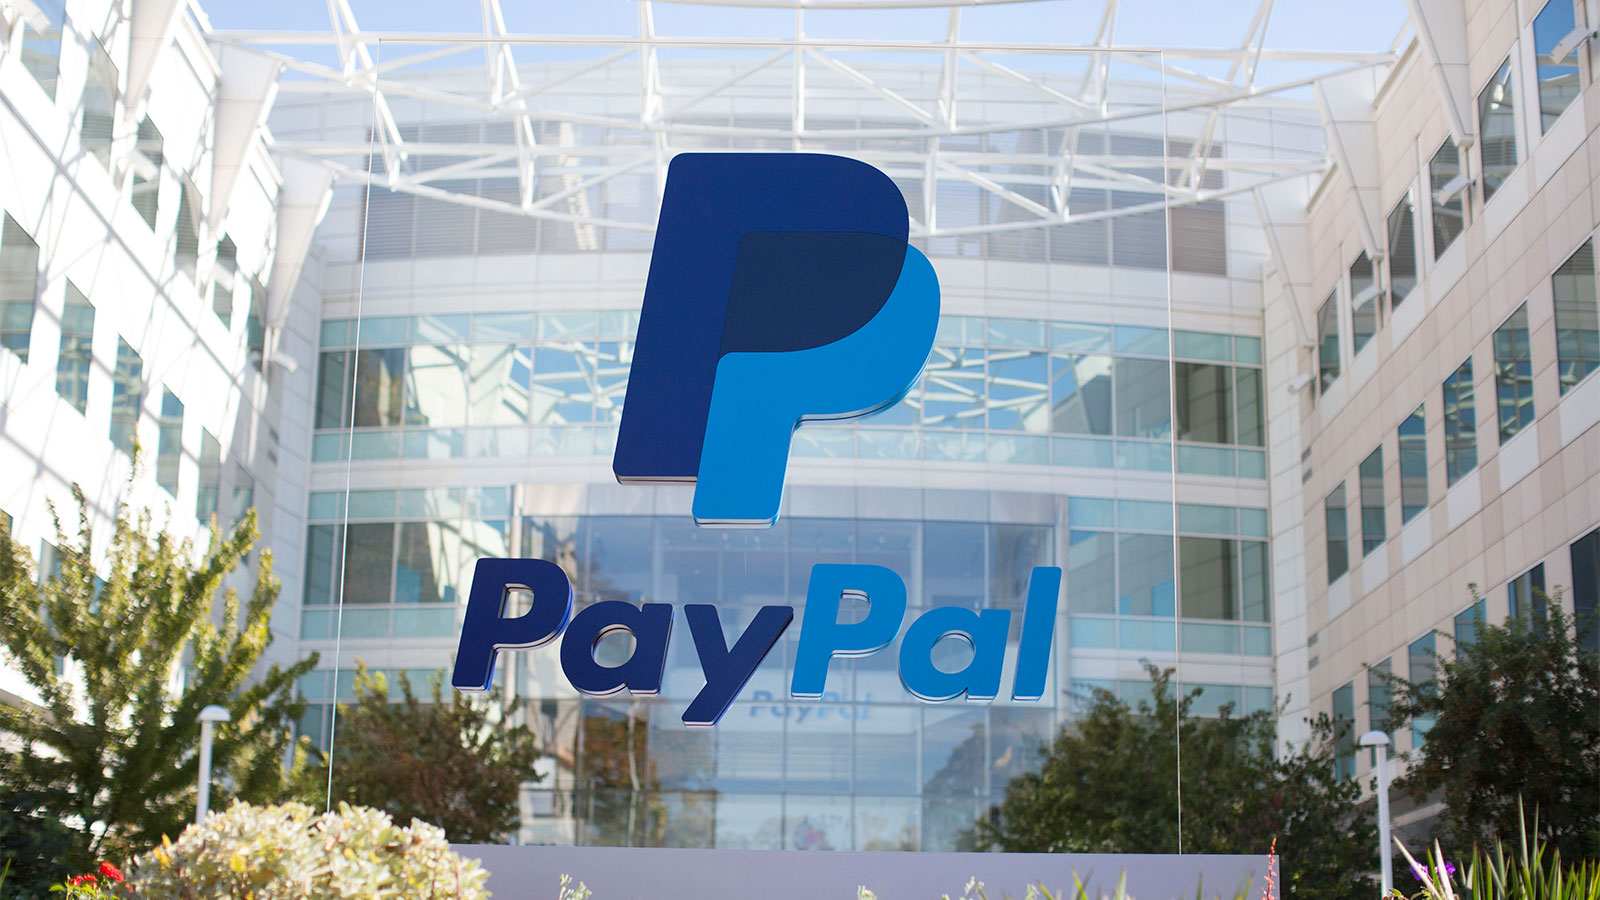 paypal number of accounts growth chart